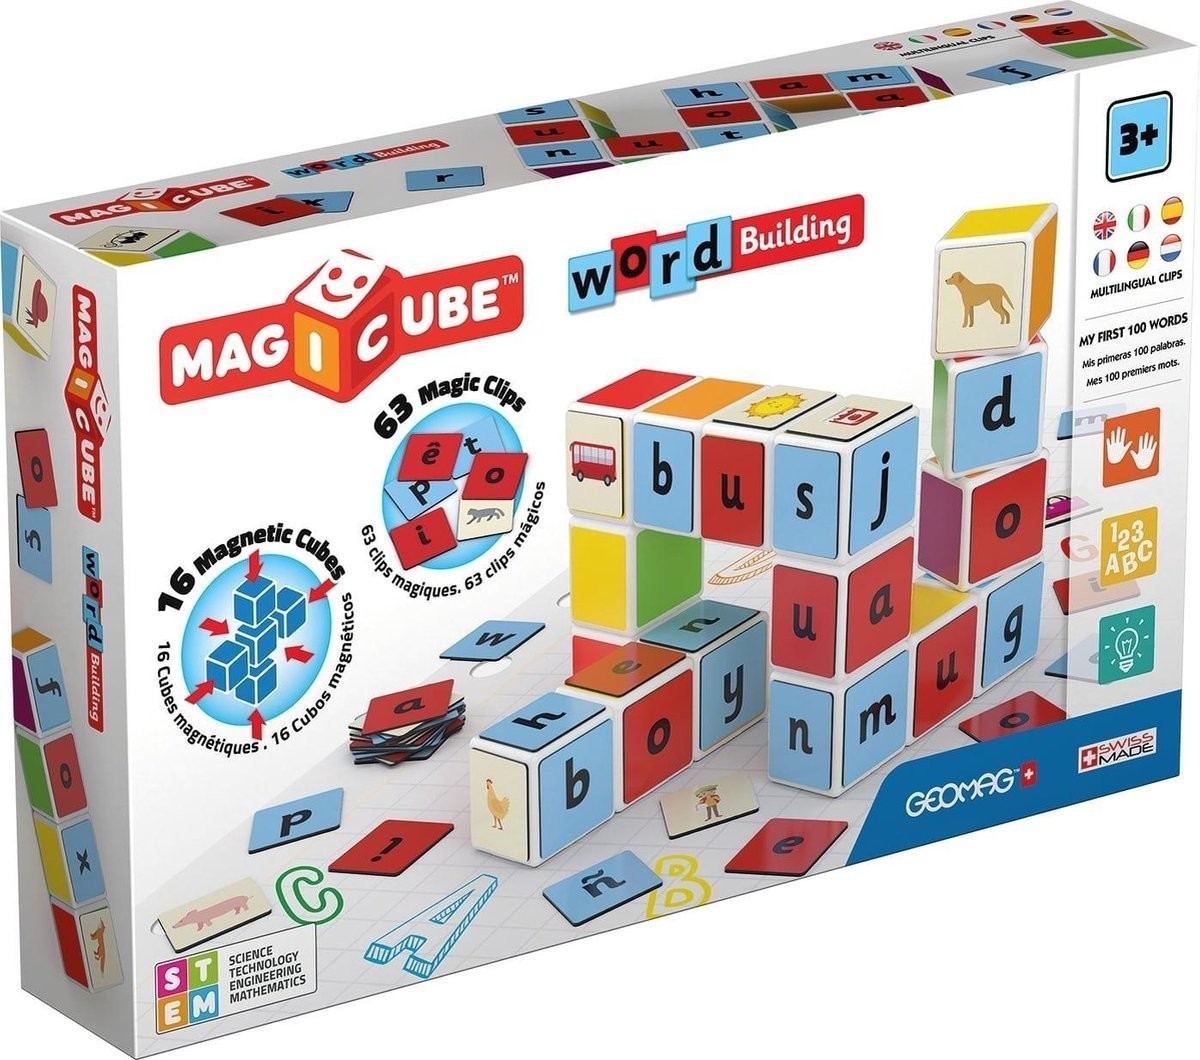 Photos - Construction Toy Geomag MagiCube Word Building 79 